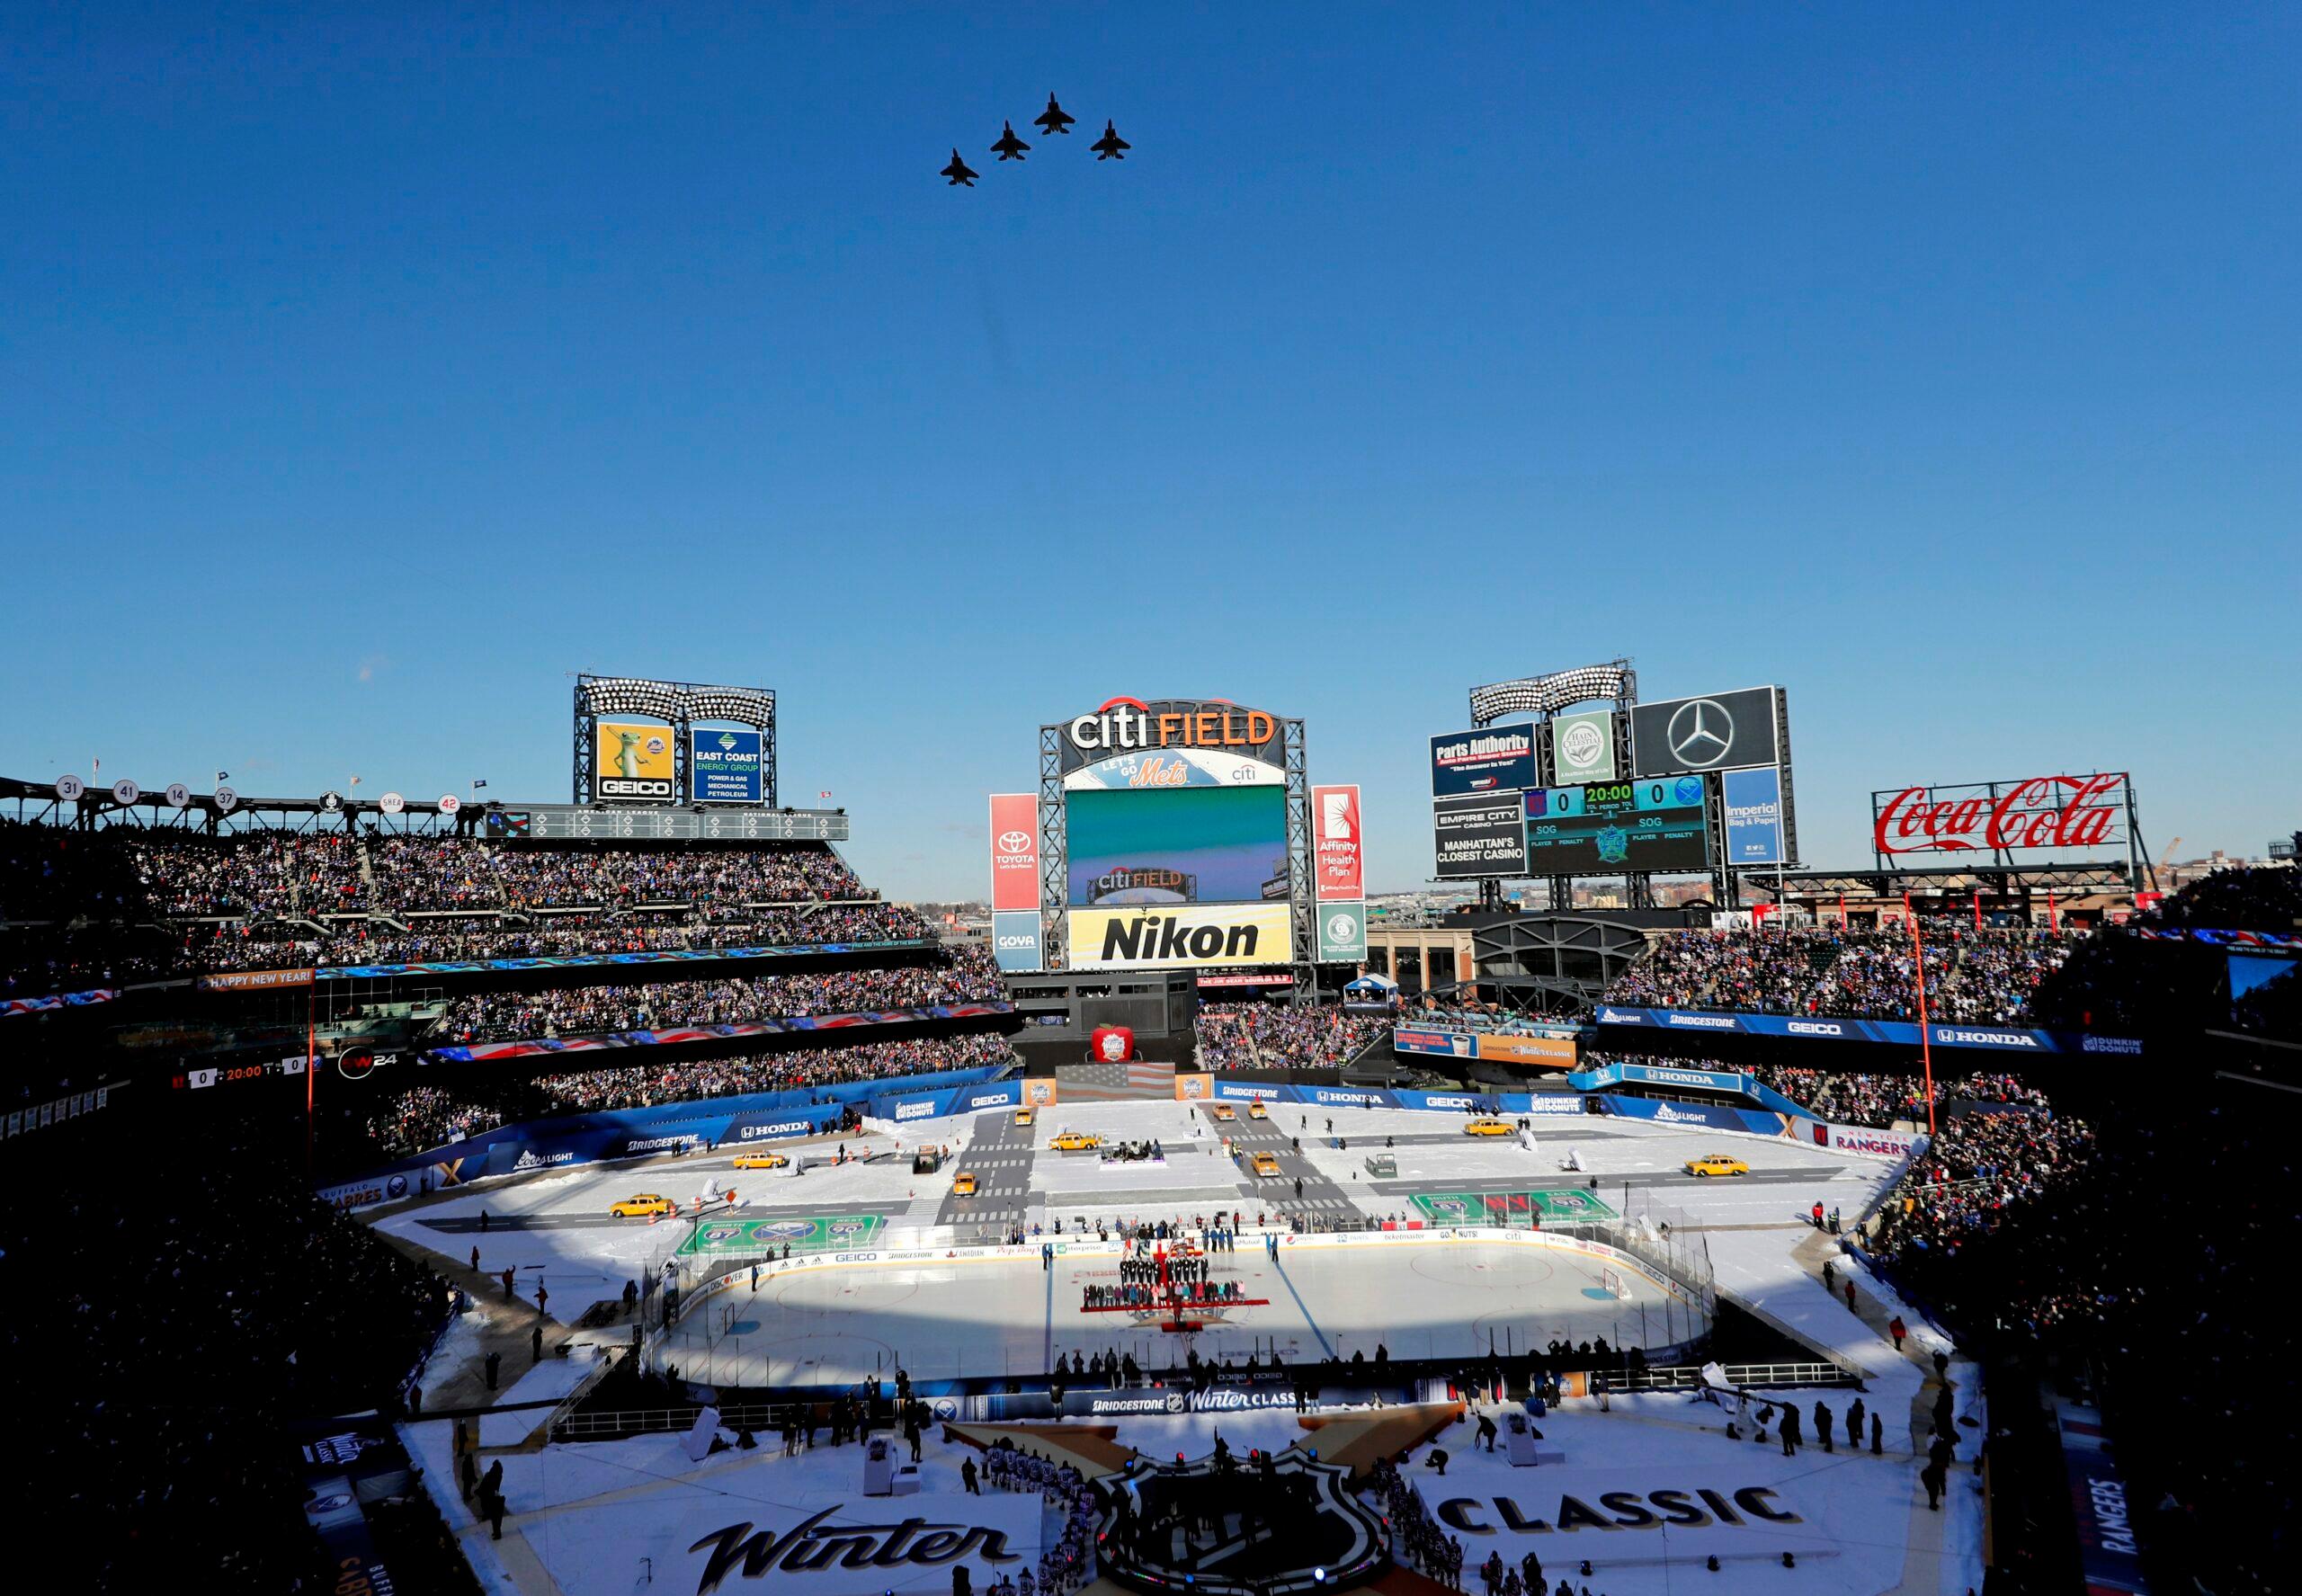 NHL Winter Classic between the Buffalo Sabres and New York Rangers at Citi Field